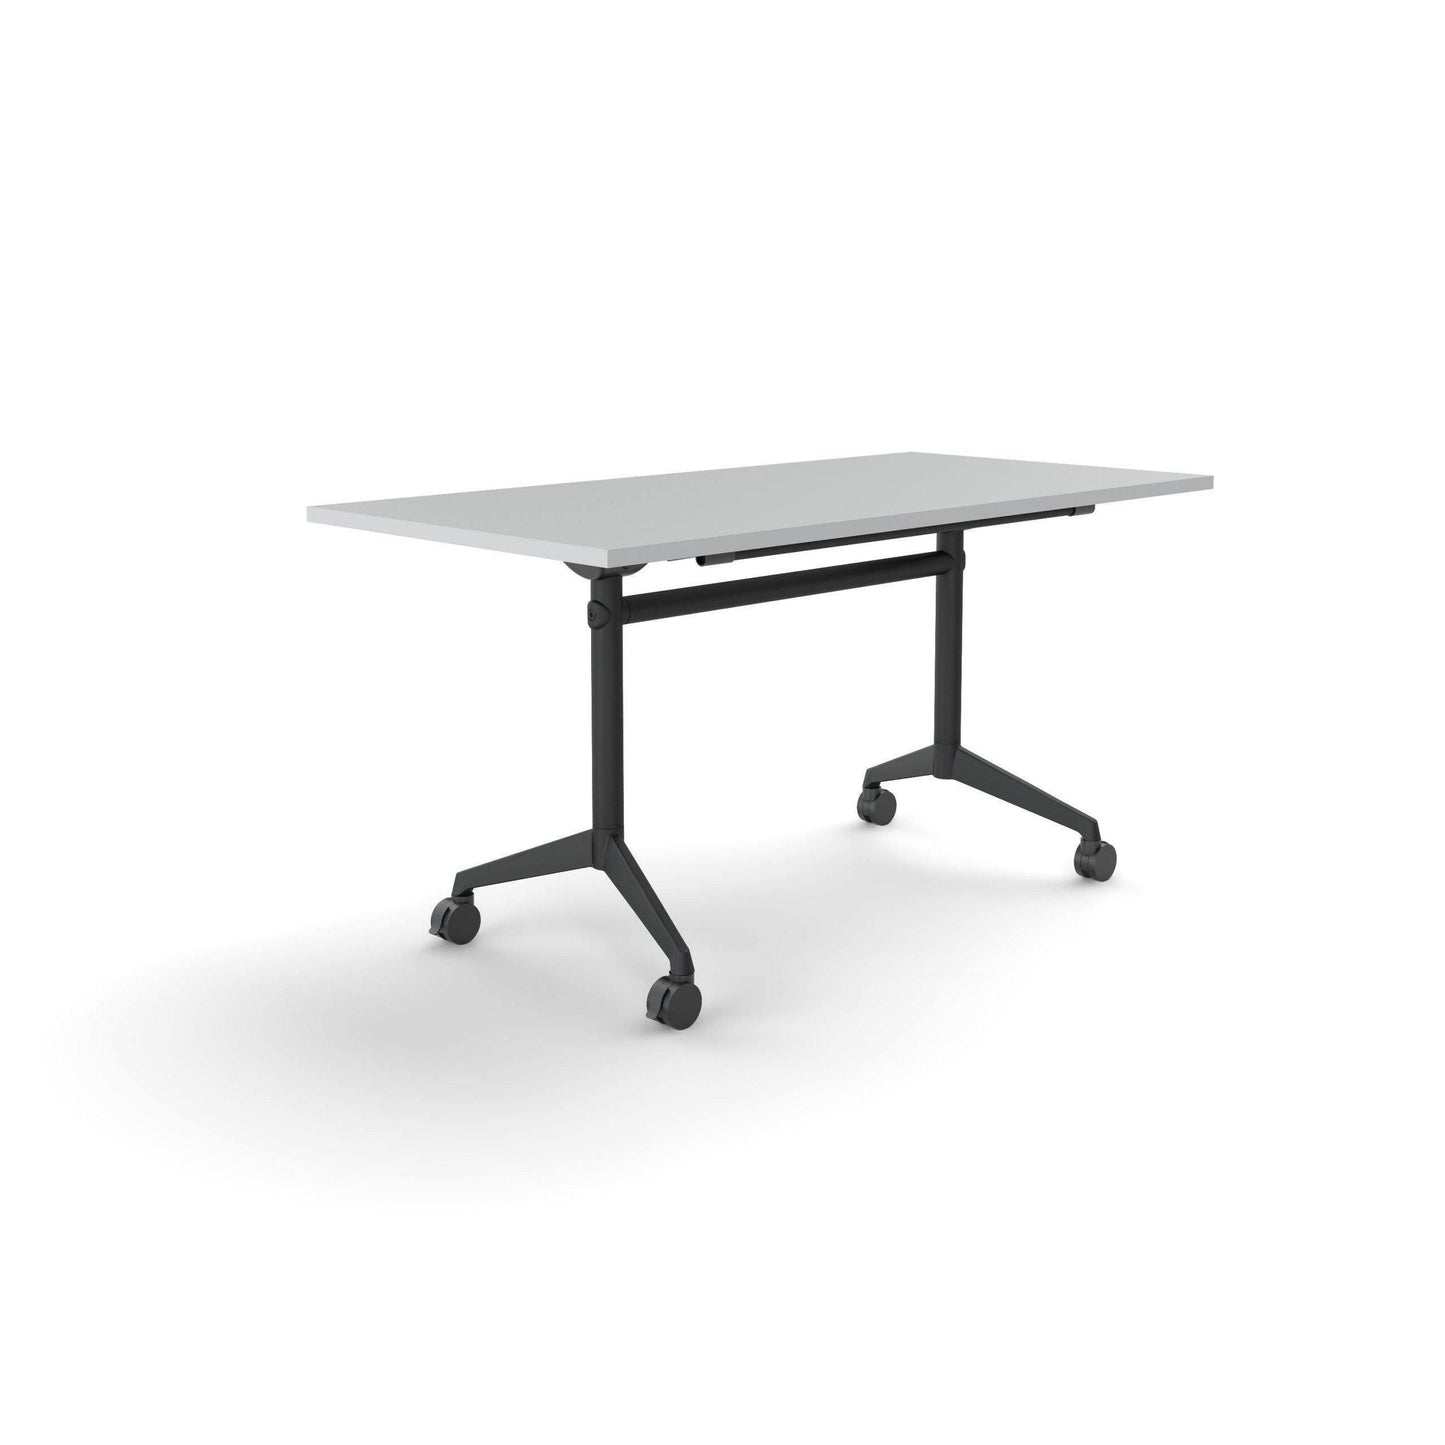 Modulus Mobile Flip Table with All Black Legs - Office Furniture Company 